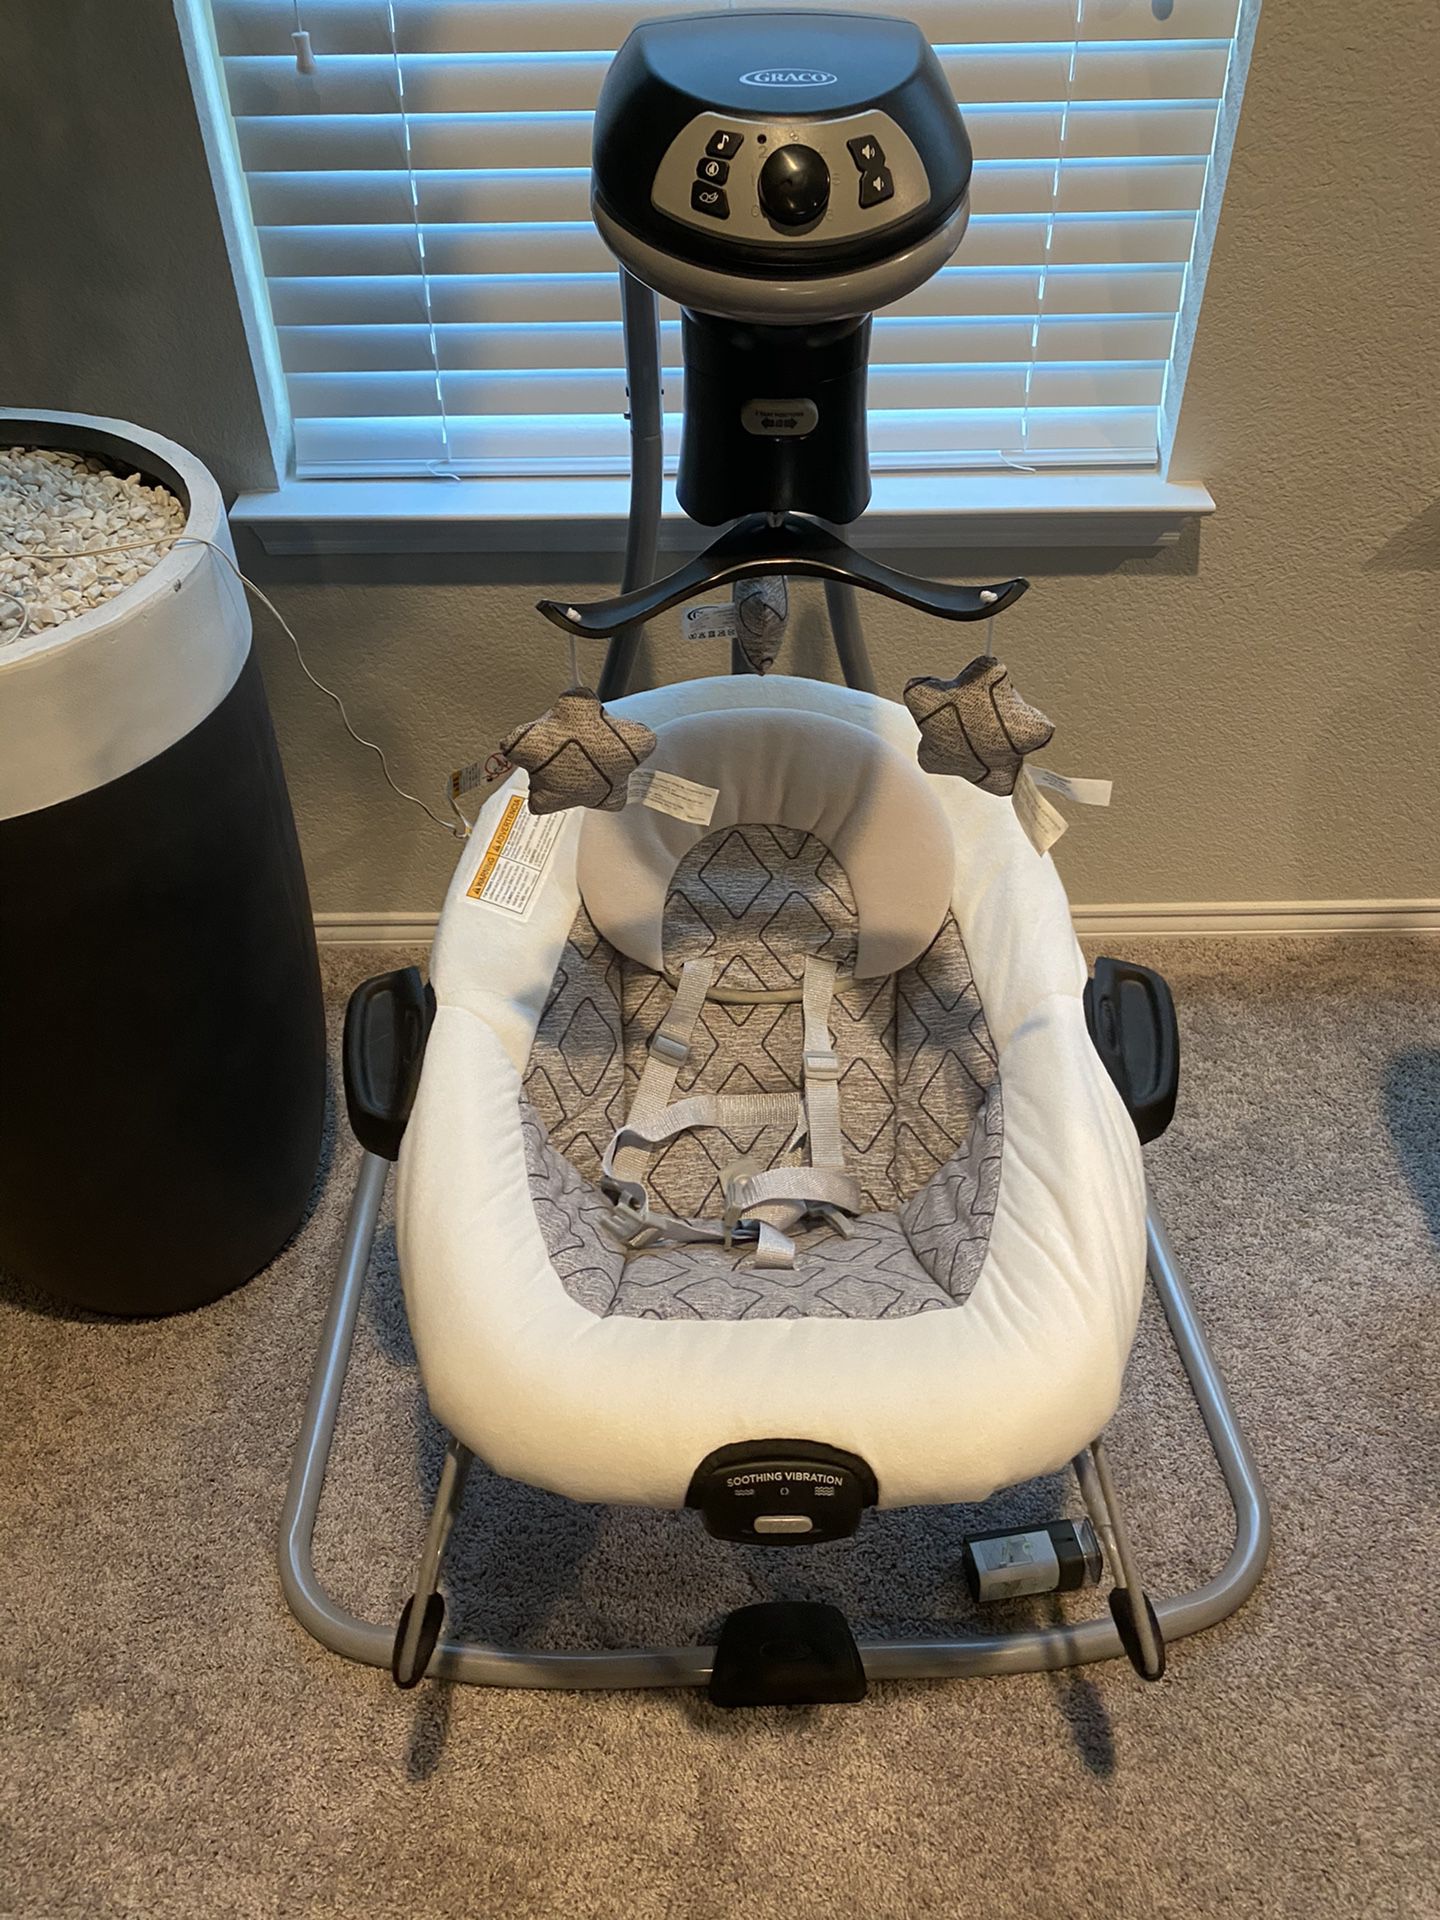 Graco DuetConnect LX Multi-Direction Baby Swing and Bouncer